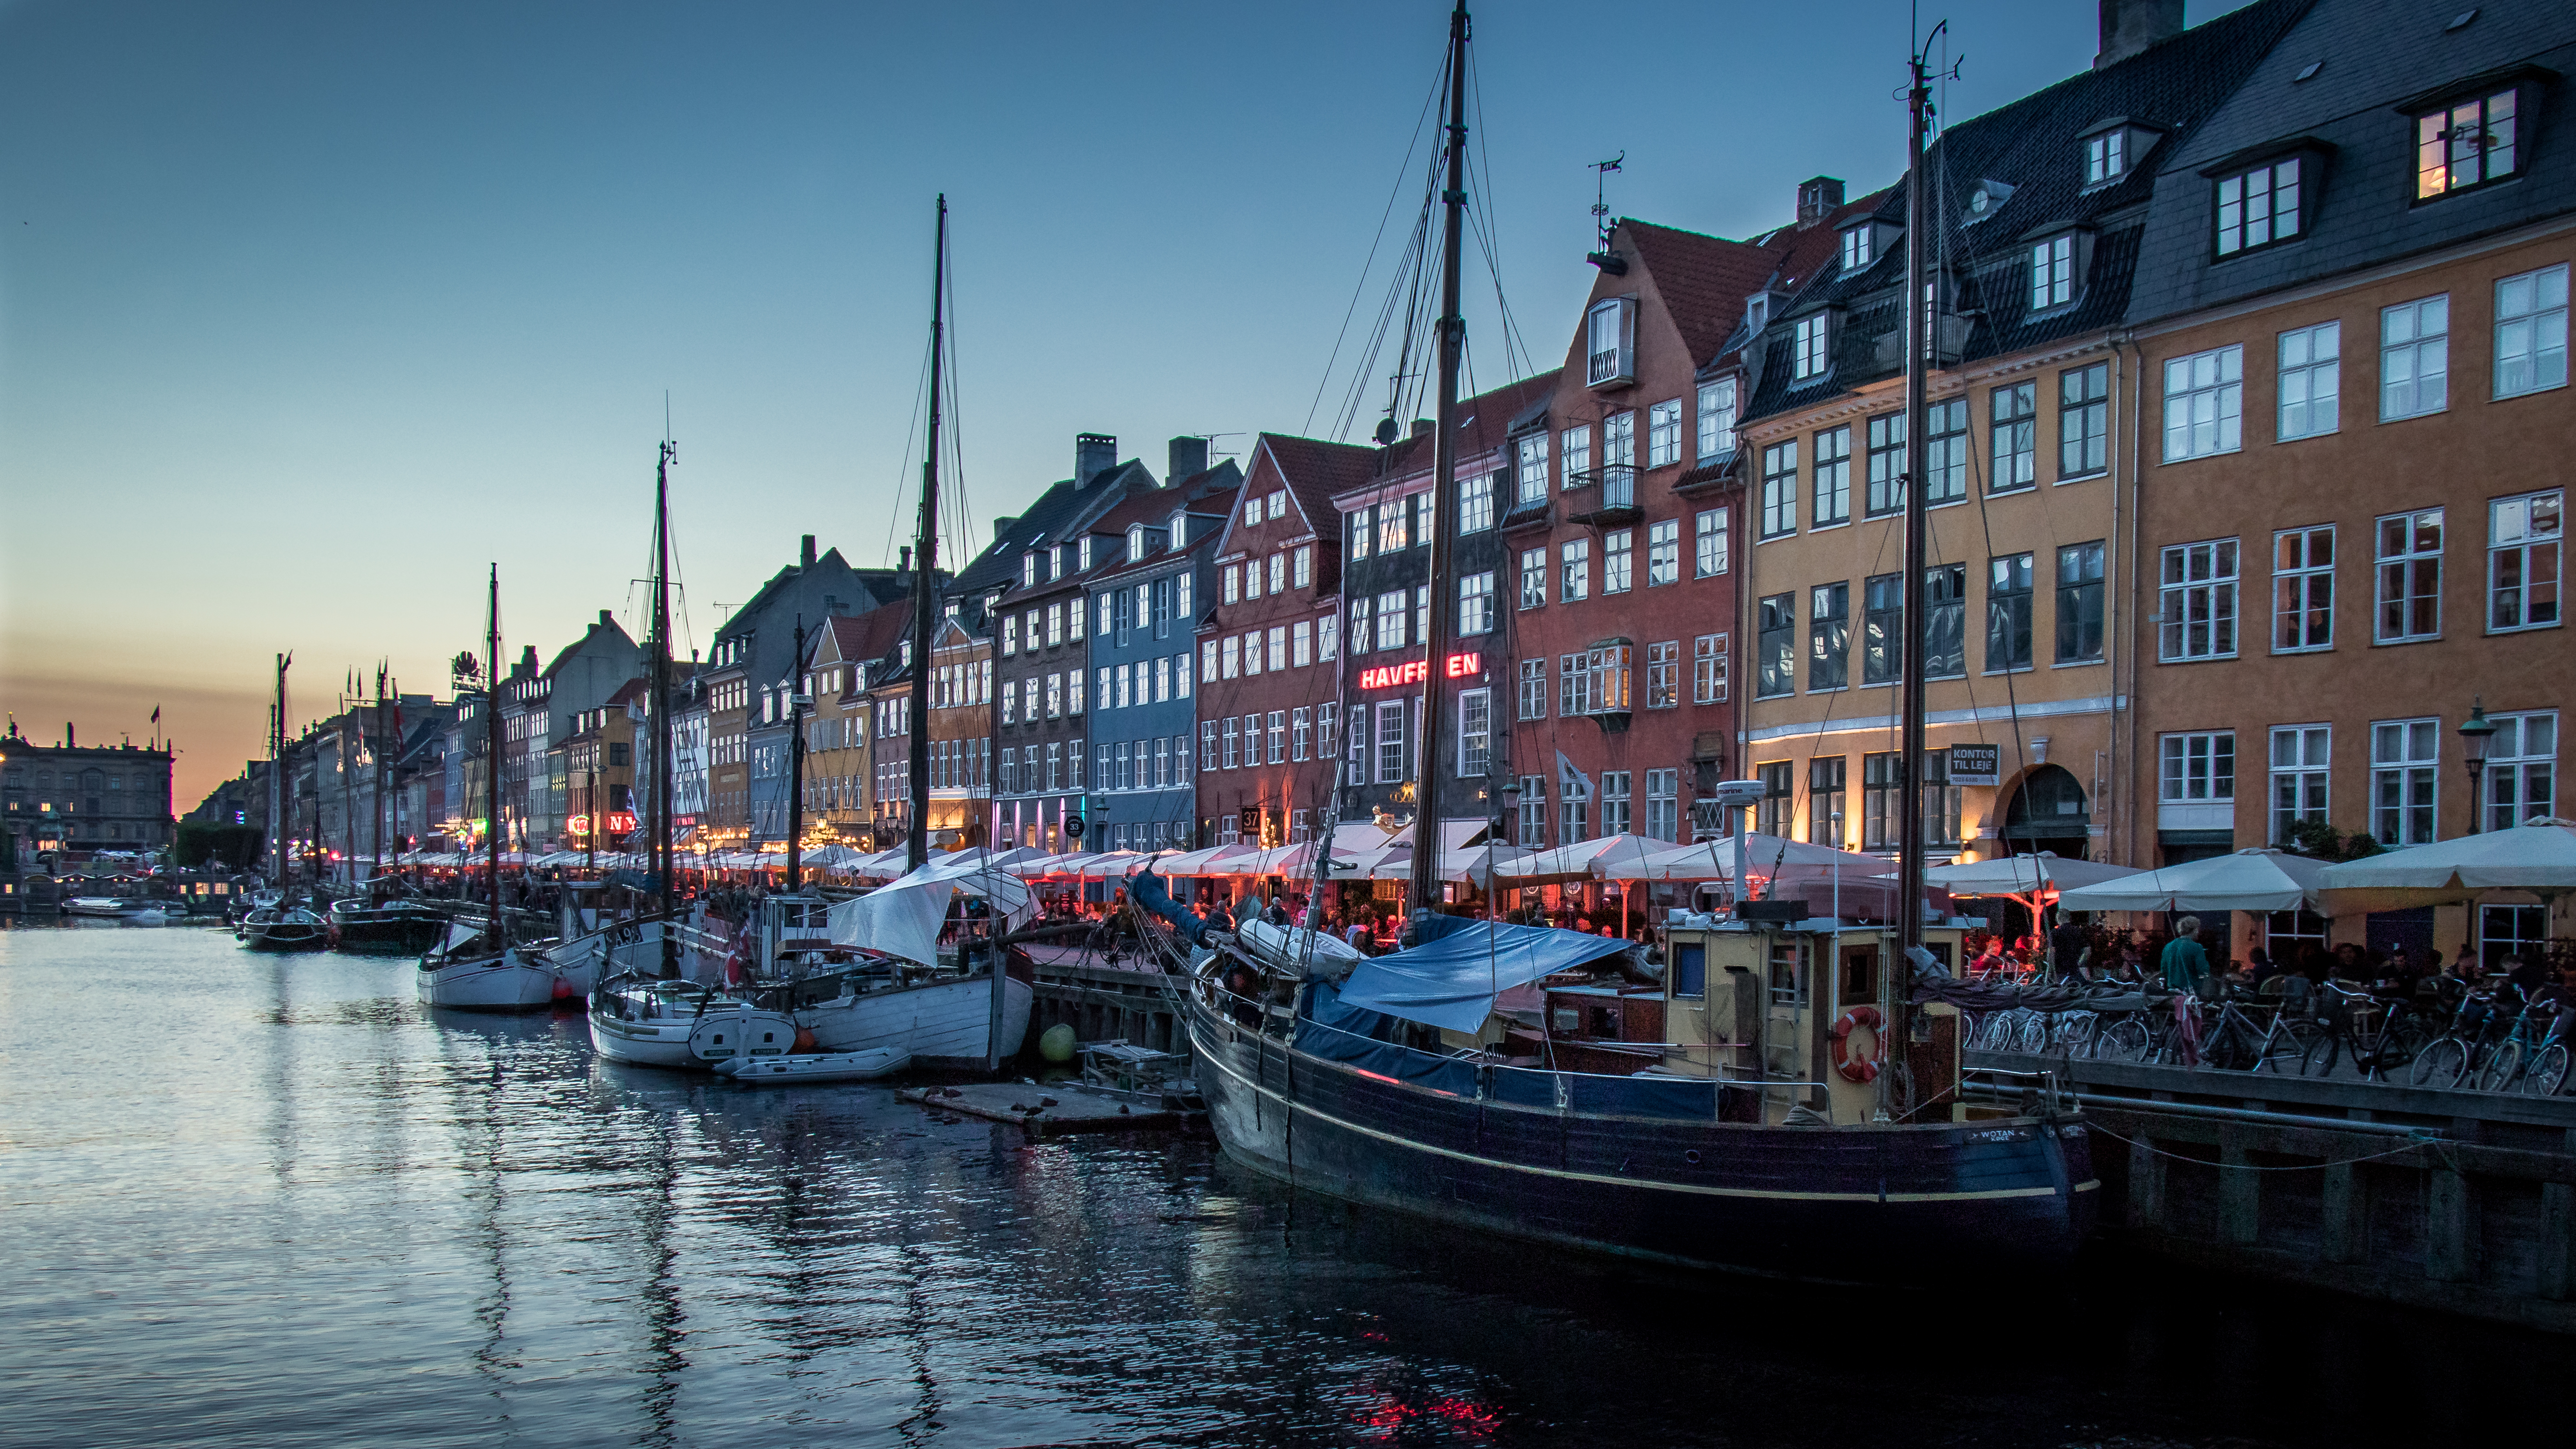 The Colors of Nyhavn